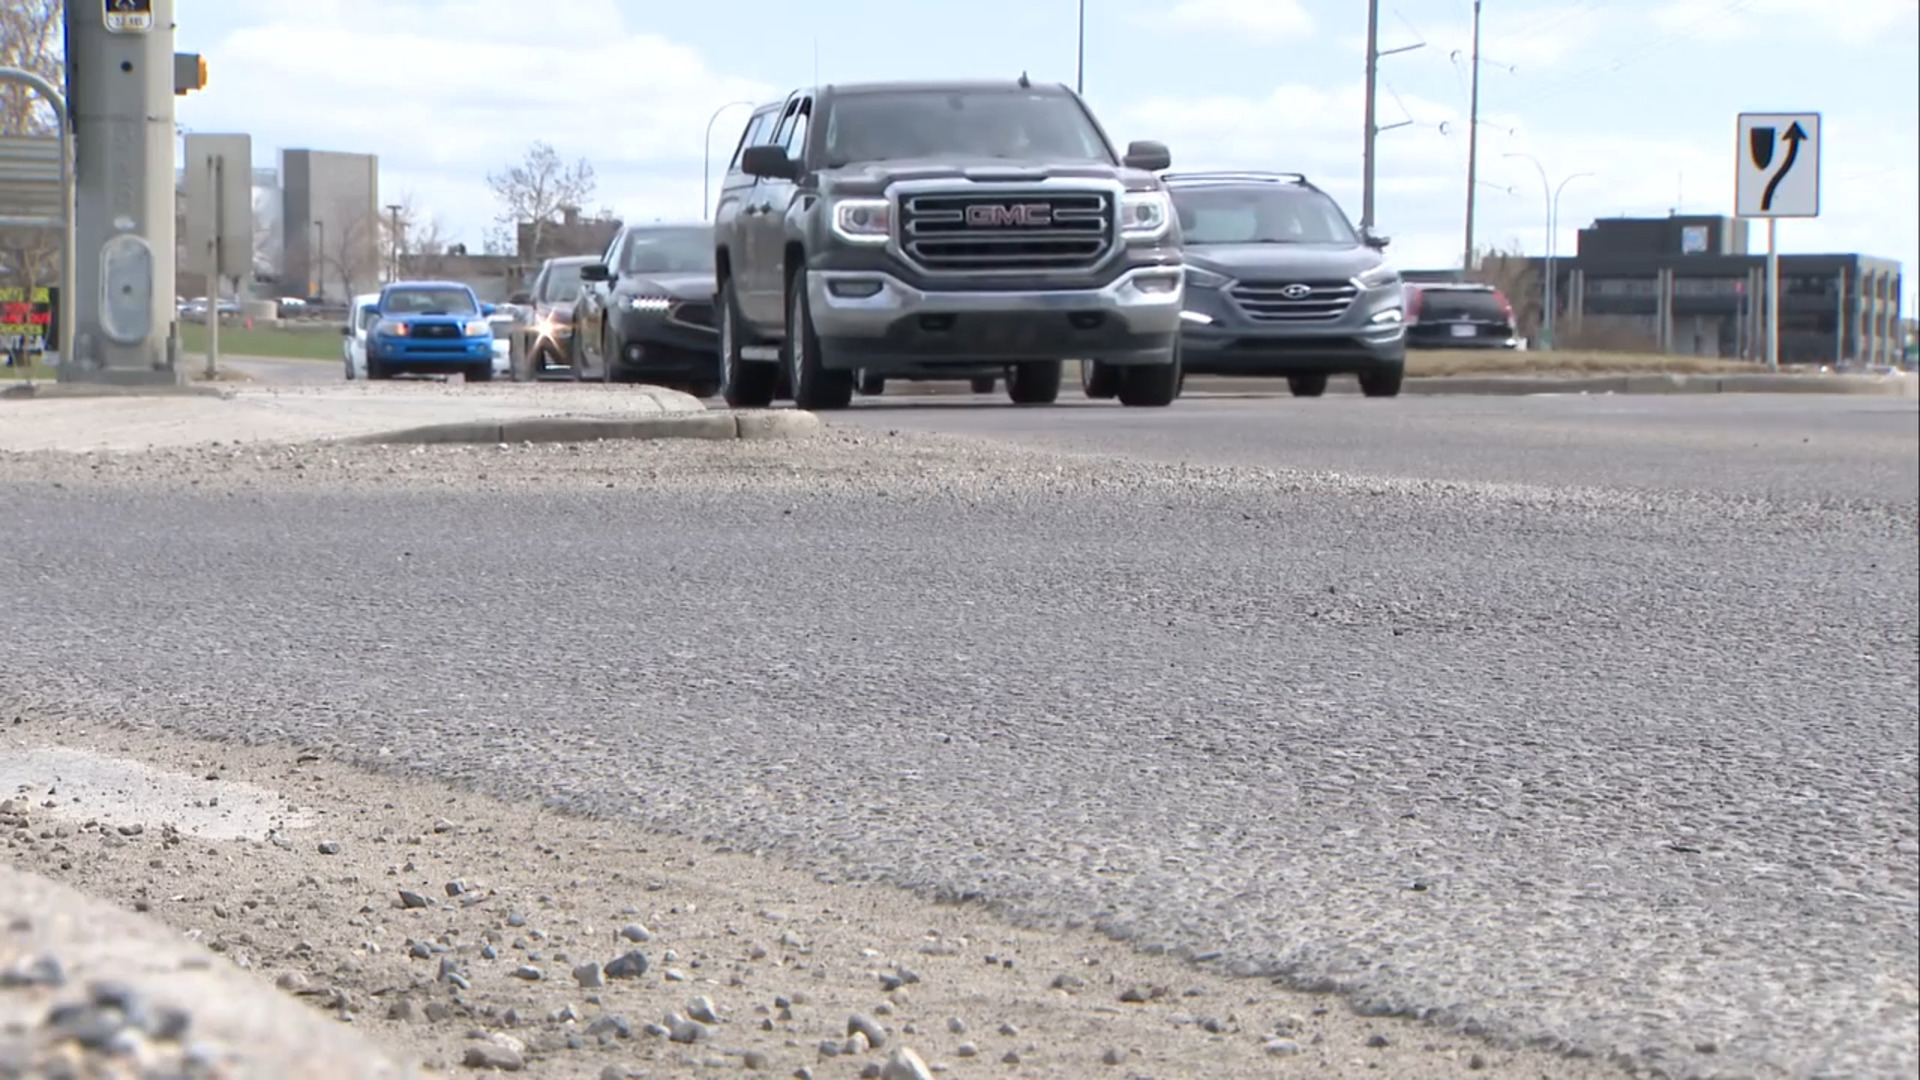 Calgary police believe speed a factor in serious-injury collision